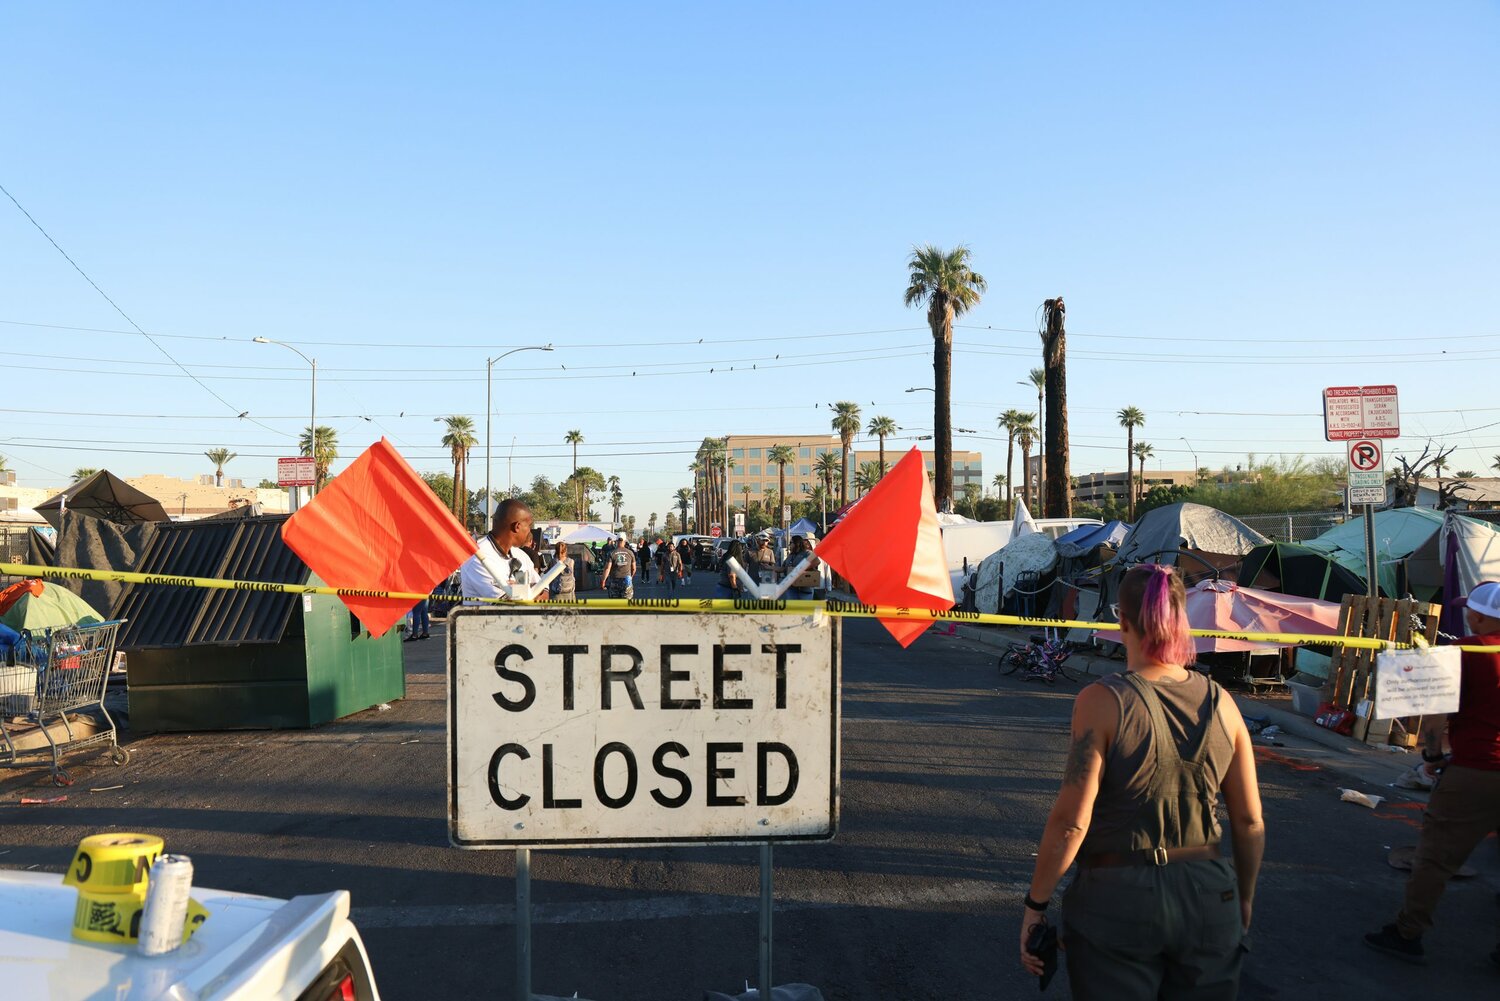 Officials from the city of Phoenix block off 12th Avenue between Jefferson and Madison streets on the morning of Oct. 20 to facilitate the clearing of a homeless encampment under a court order issued earlier this year. (Photo by John Leos/Cronkite News)